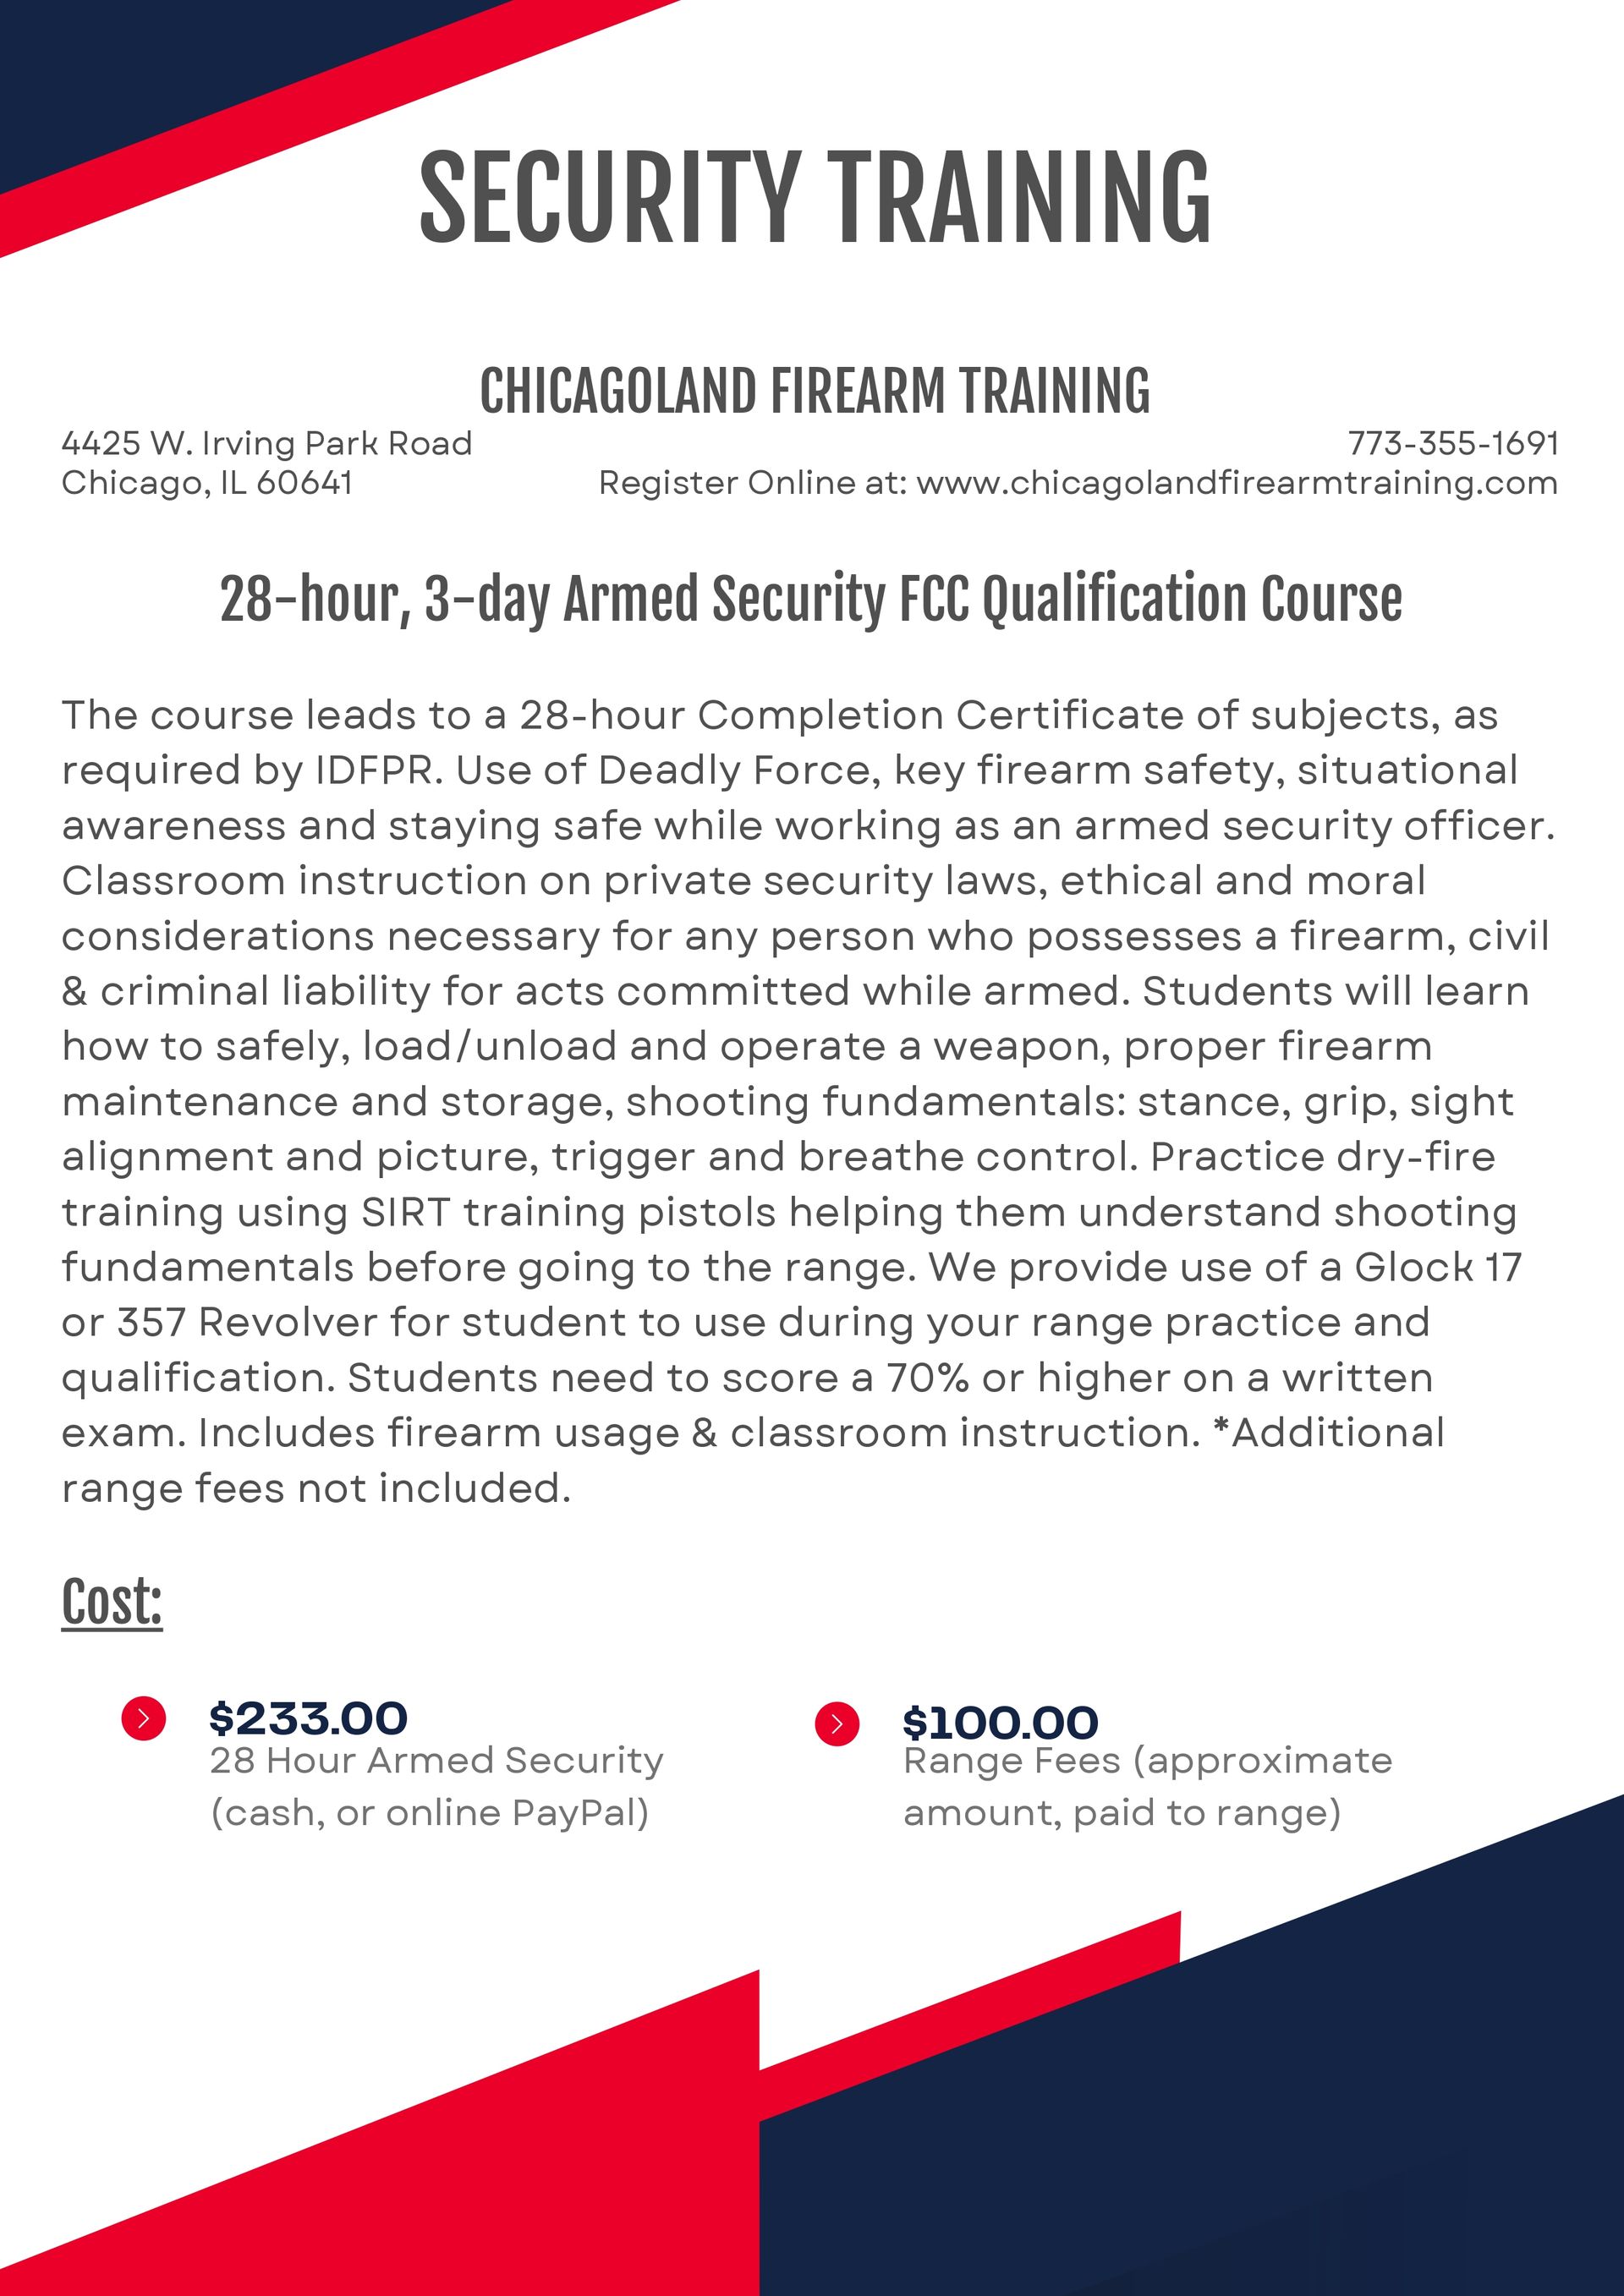 chicagoland firearm training advertises a 28 hour 3 day armed security class